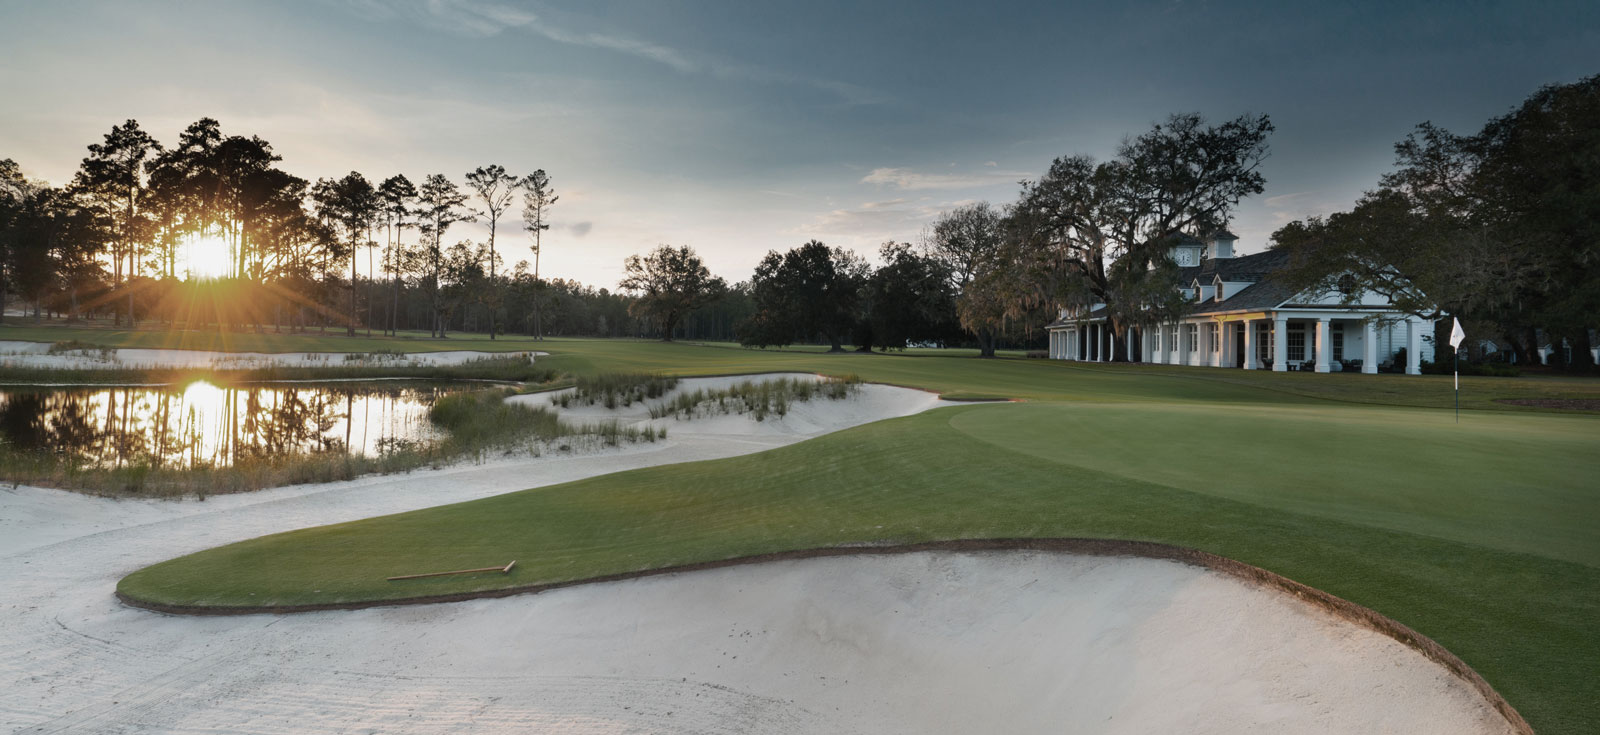 Photograph of a sunrise at the Congaree golf course from a sand trap looking onto the clubhouse